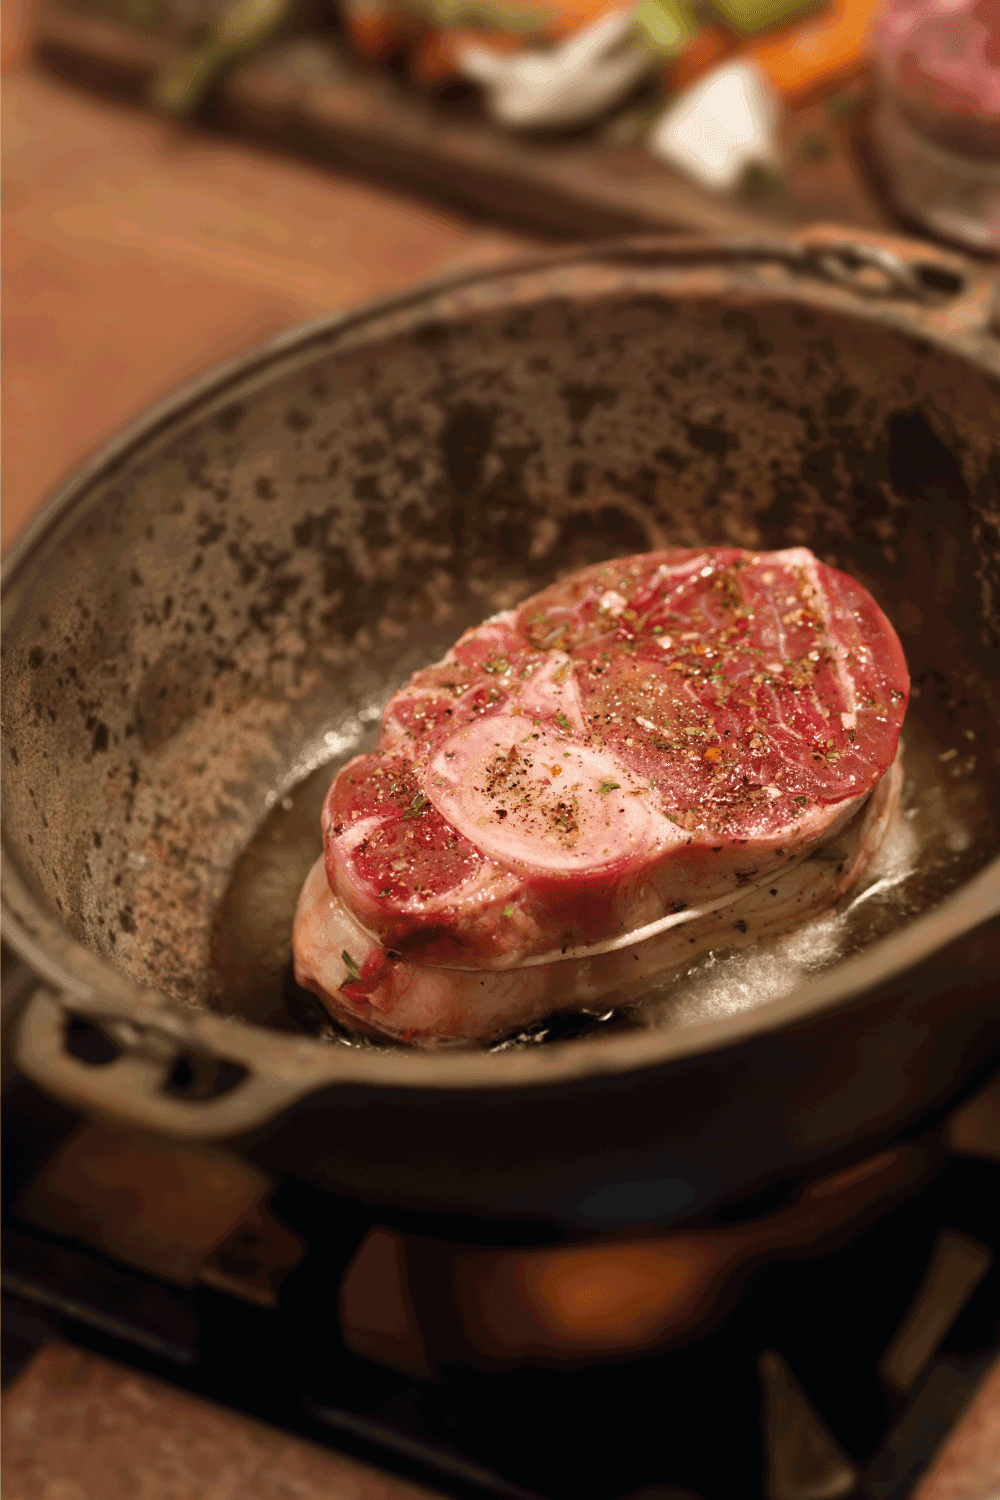 Preparing Osso Buco, Raw Veal Shanks Being Seared in a Cast Iron Pot preparation for braising